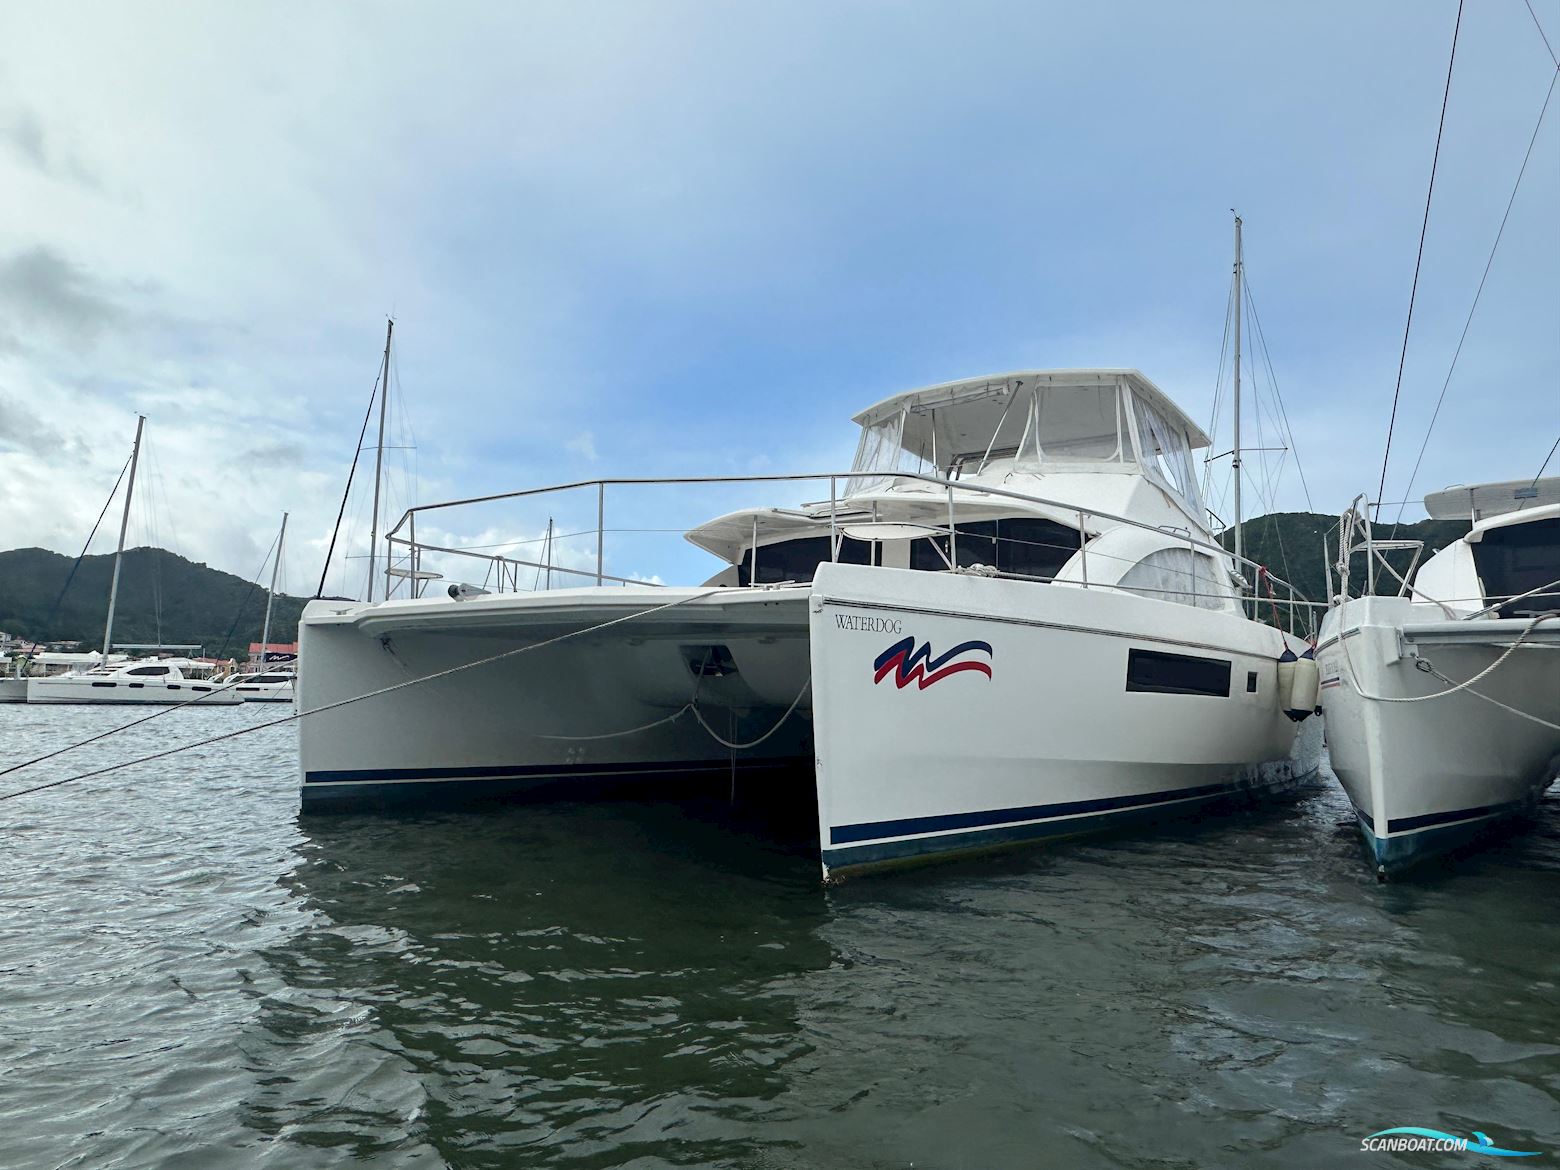 Leopard 51 Powercat Motor boat 2019, with Yanmar engine, No country info